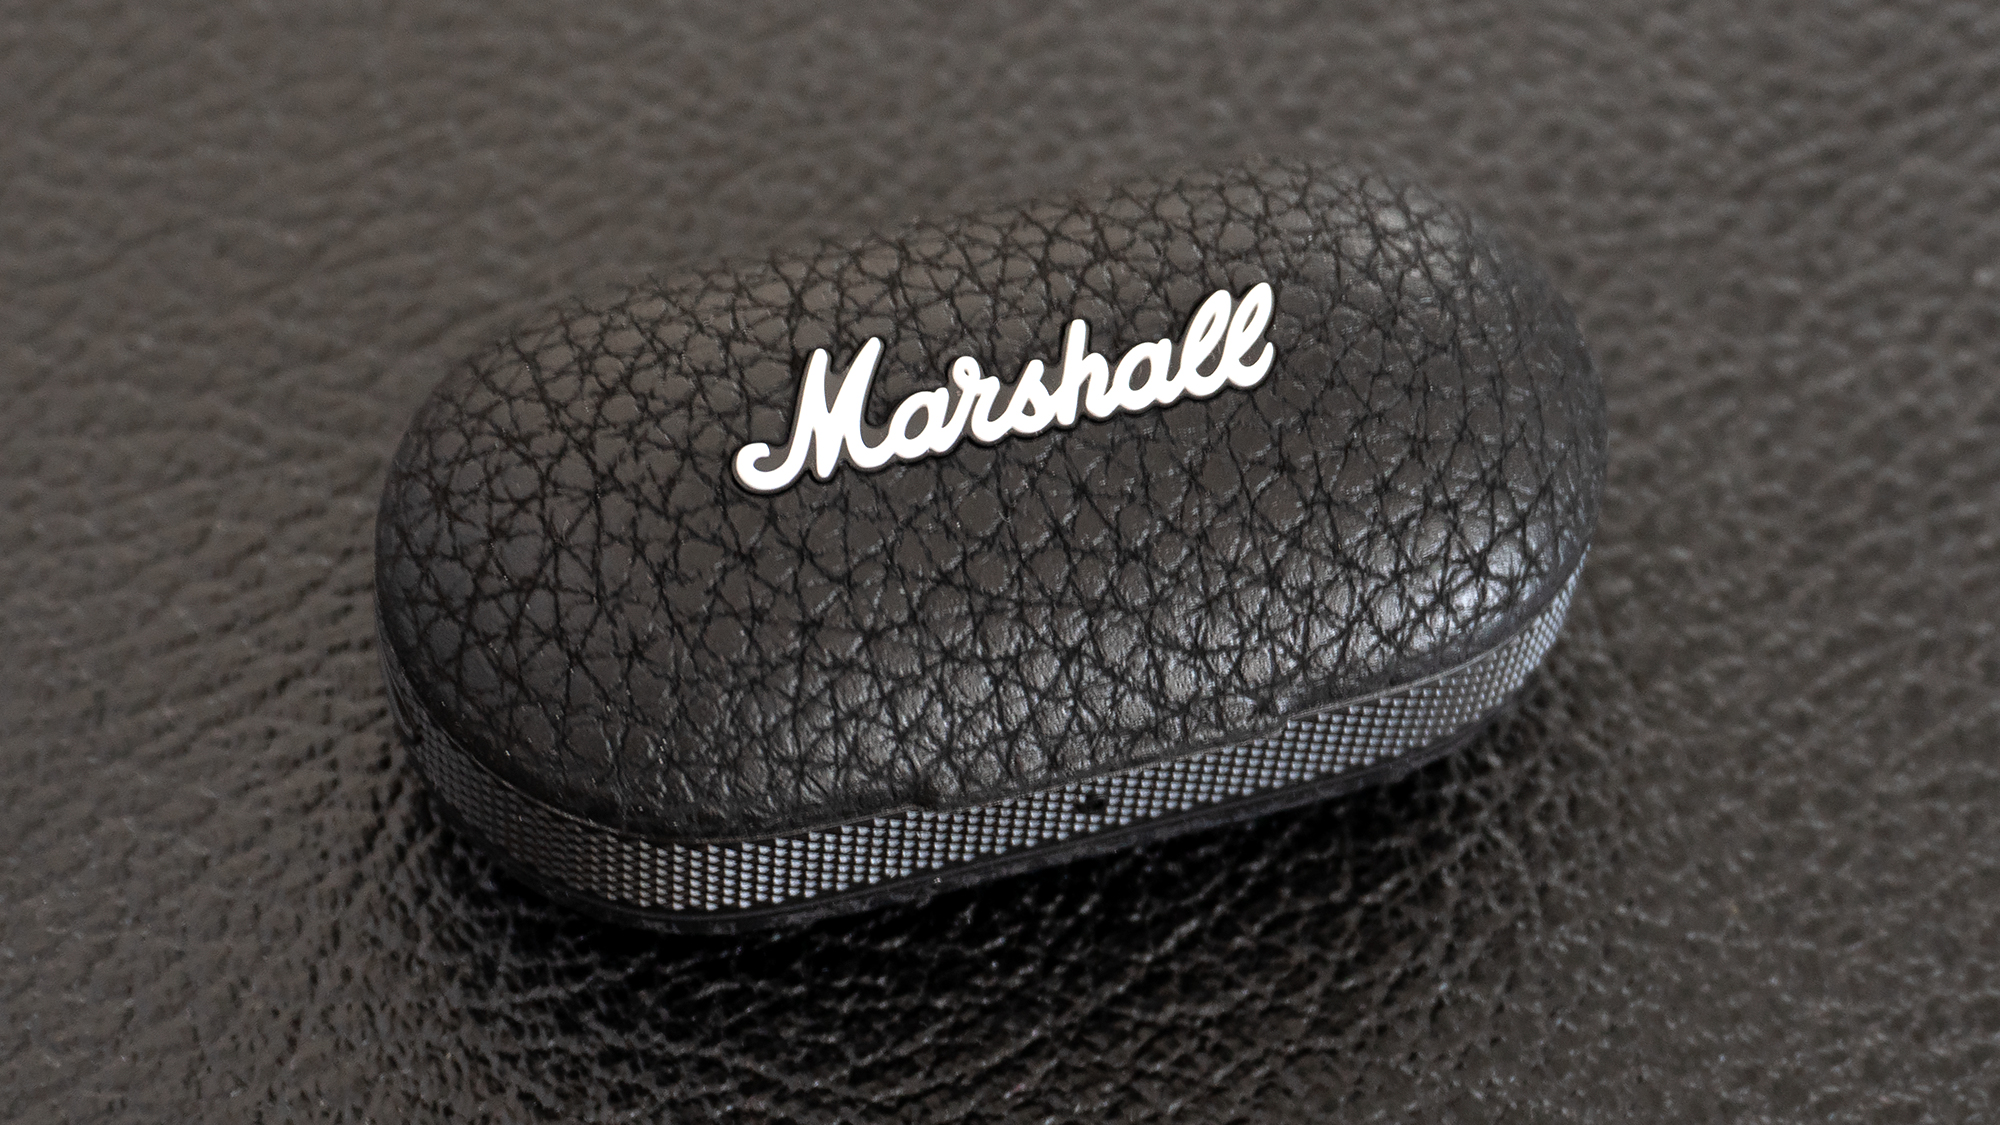 Marshall has delivered some lovely hardware with the Mode II, and solid sound quality, but you can find better-sounding alternatives at a cheaper price point if features like active noise cancellation aren't important to you. (Photo: Andrew Liszewski/Gizmodo)